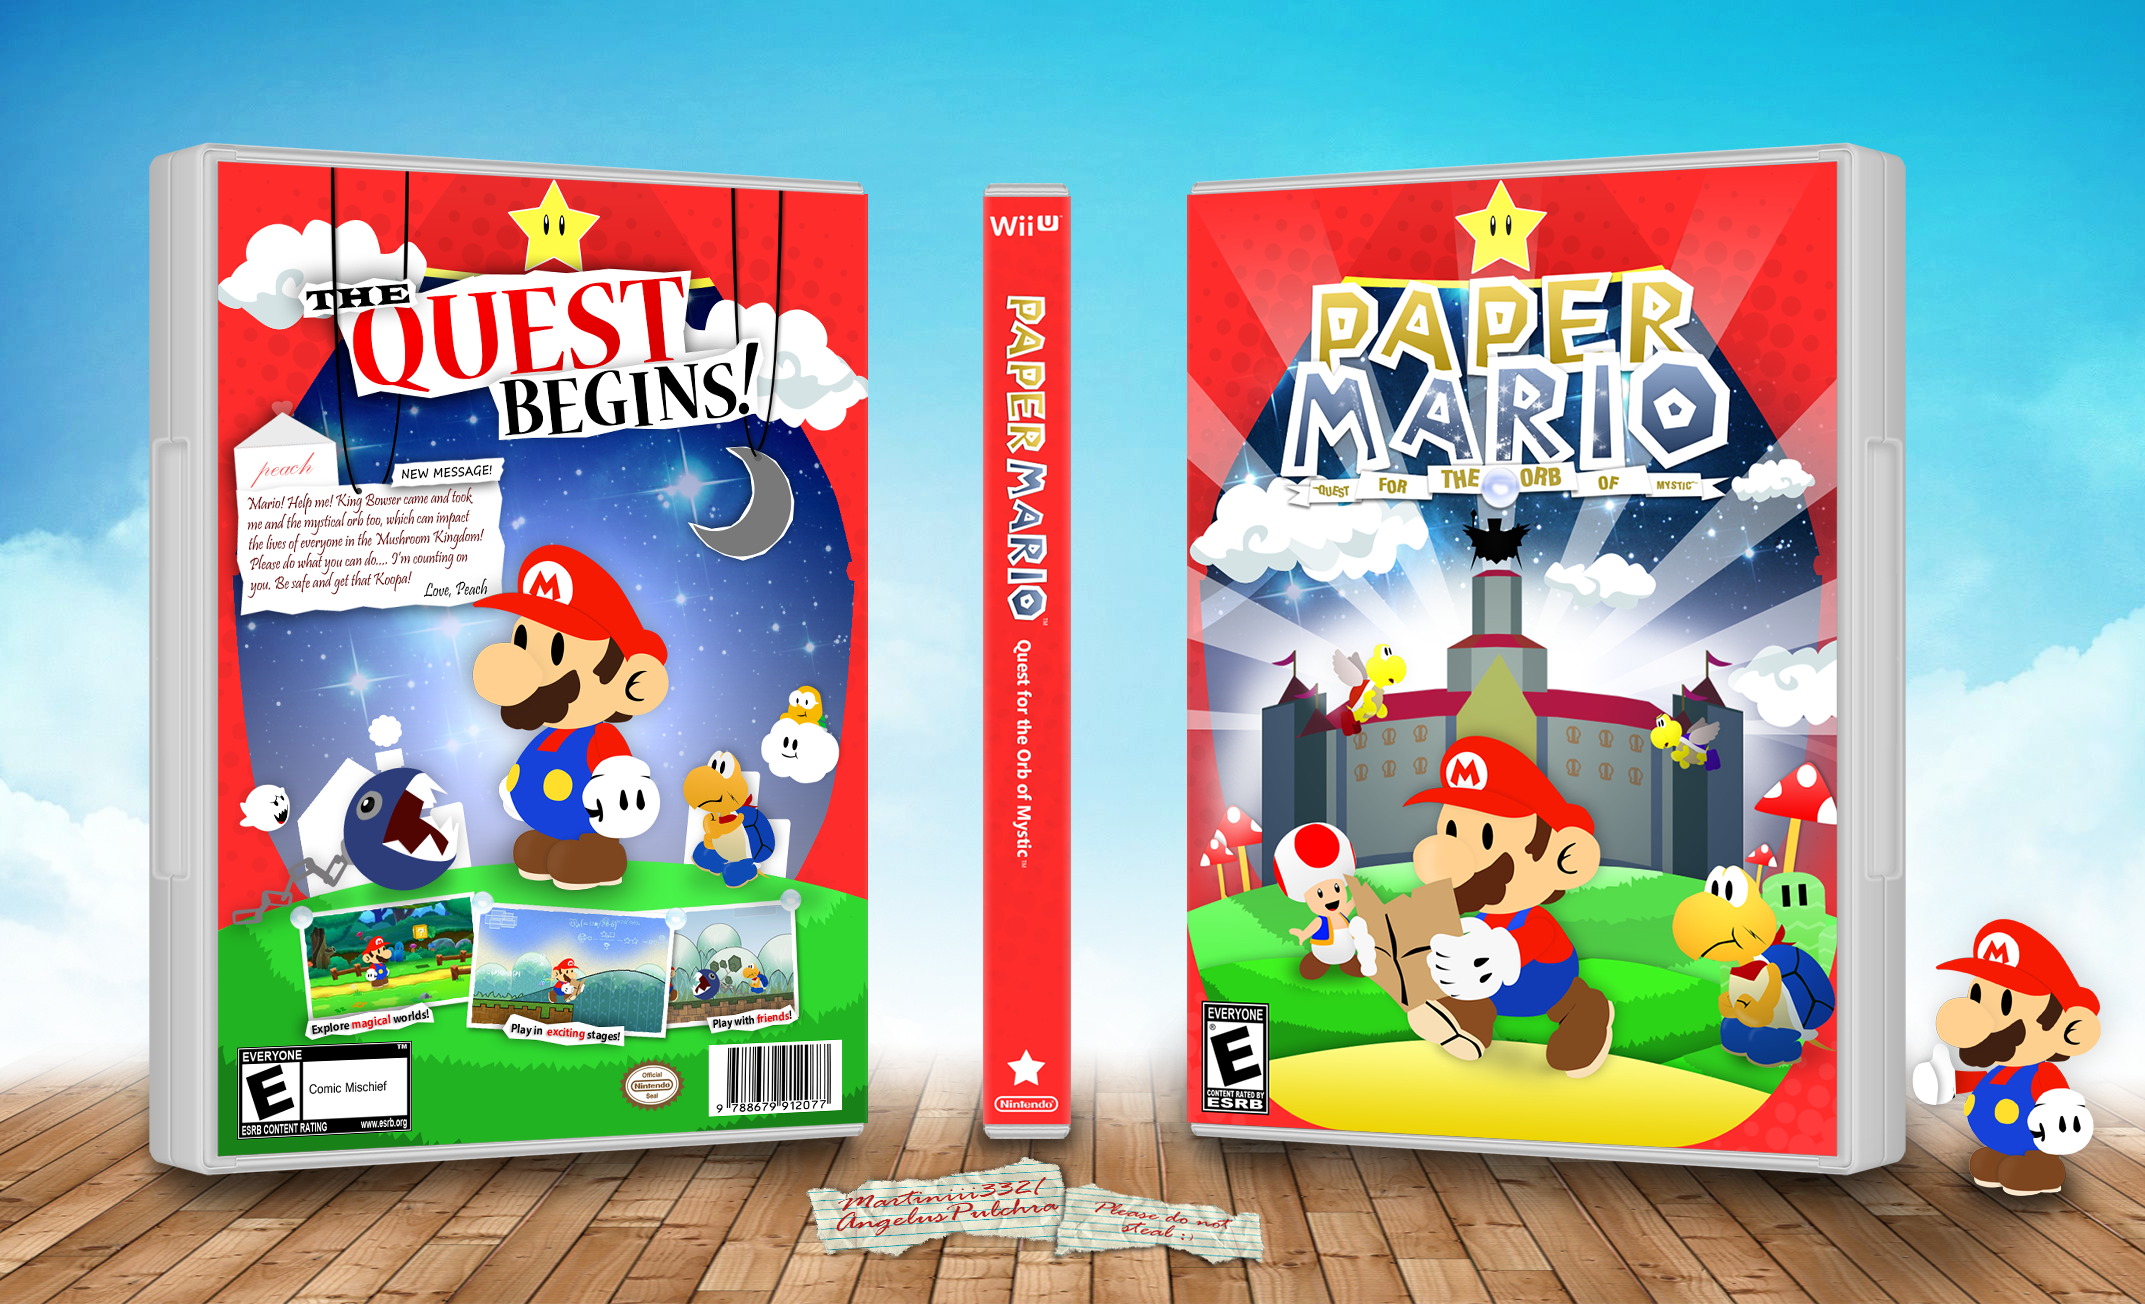 Paper Mario: Quest for the Orb of Mystic box cover